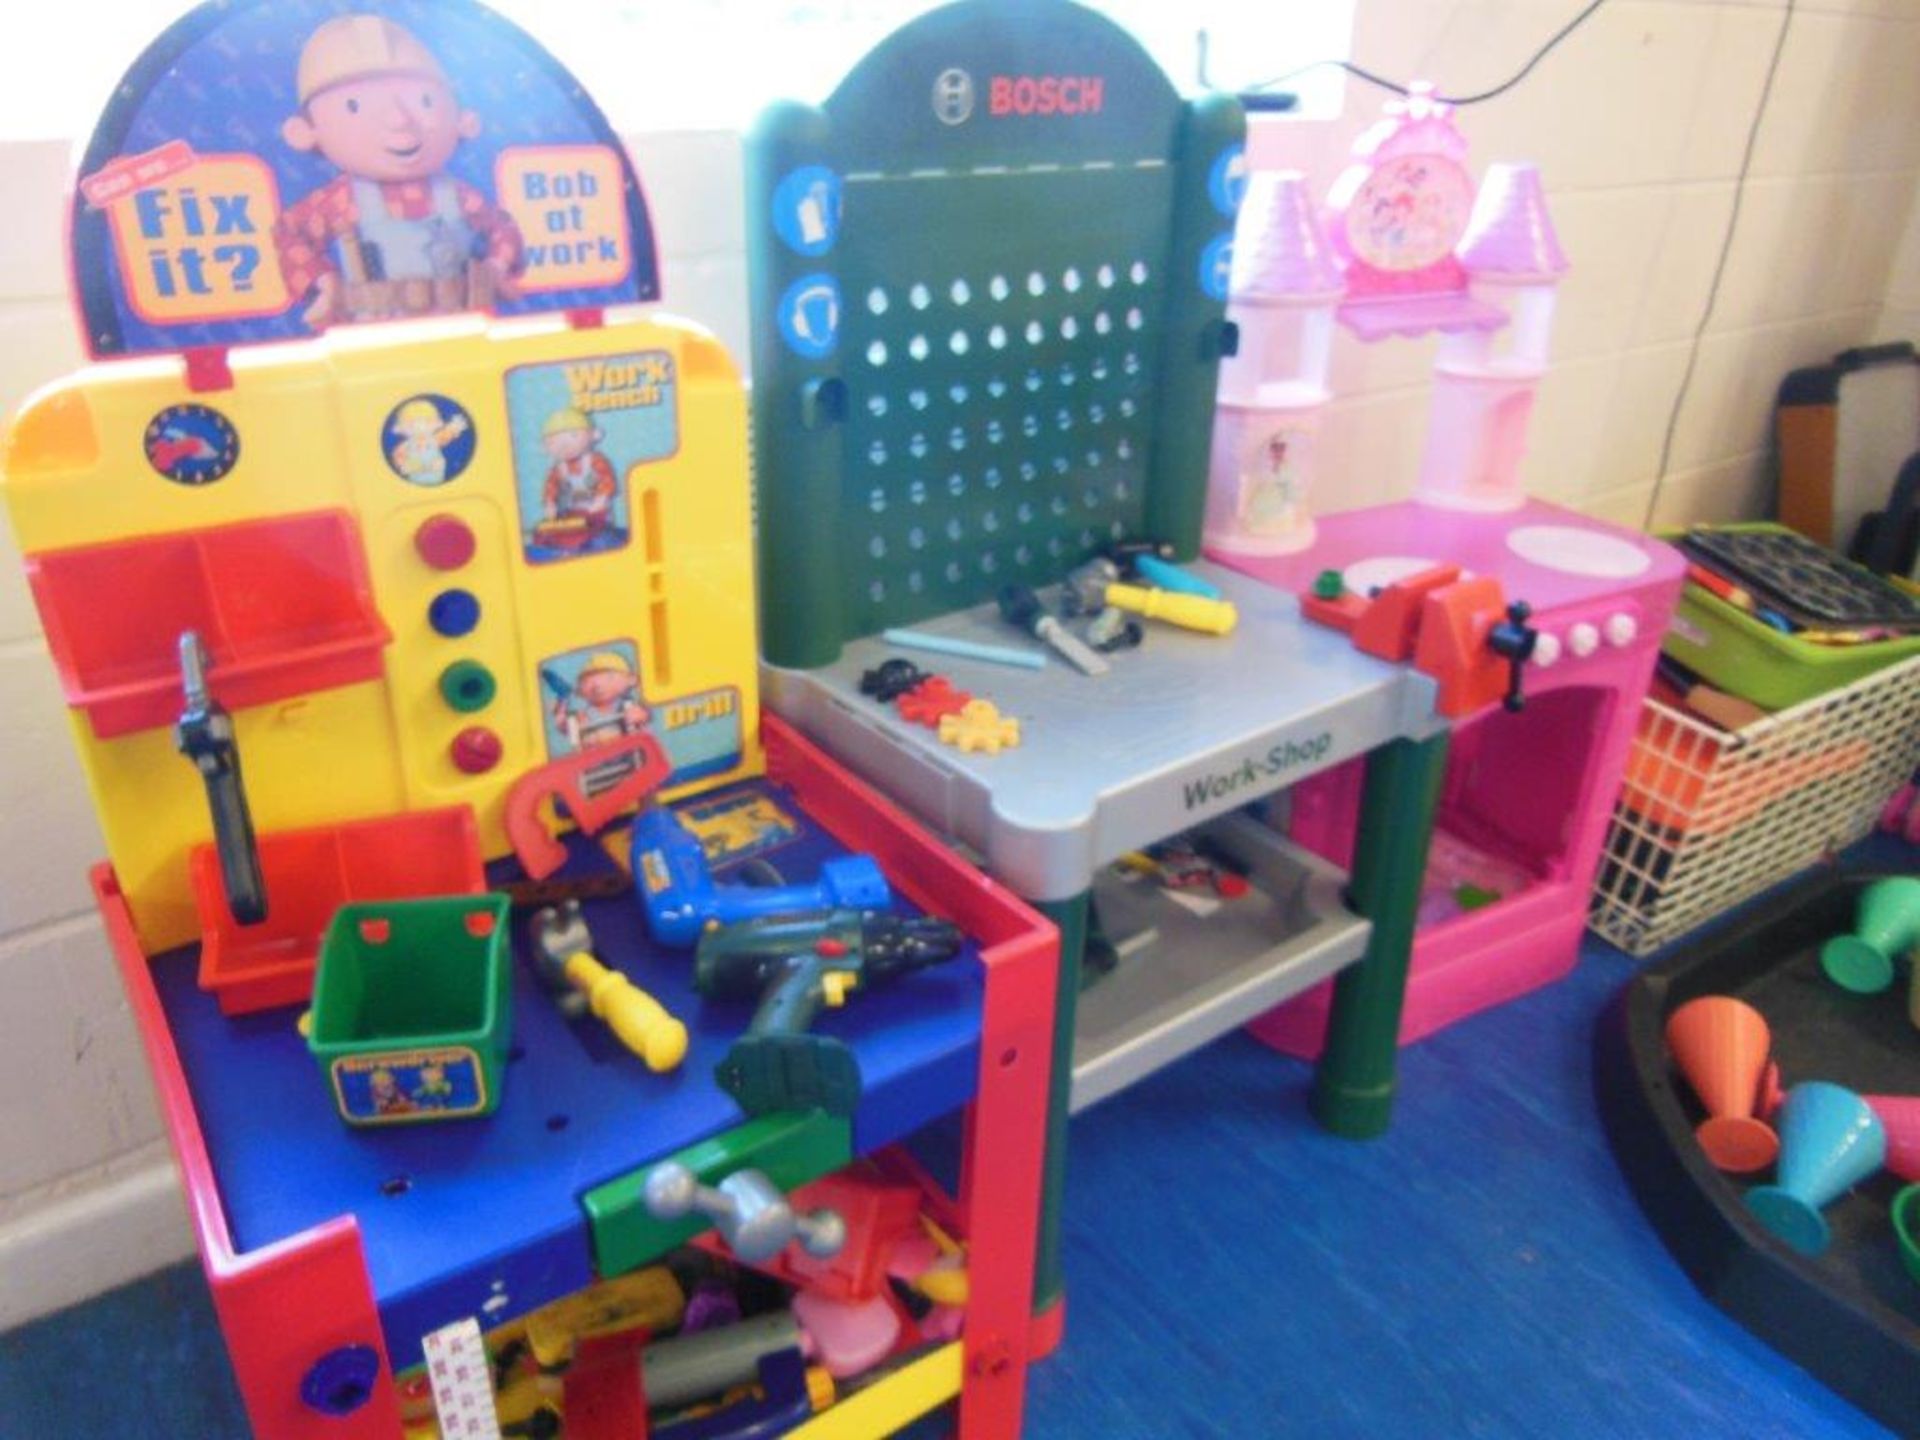 Quantity of toys in plastic boxes, Bob the Builder workbench, Bosch workbench, Barbie kitchen and - Image 3 of 3